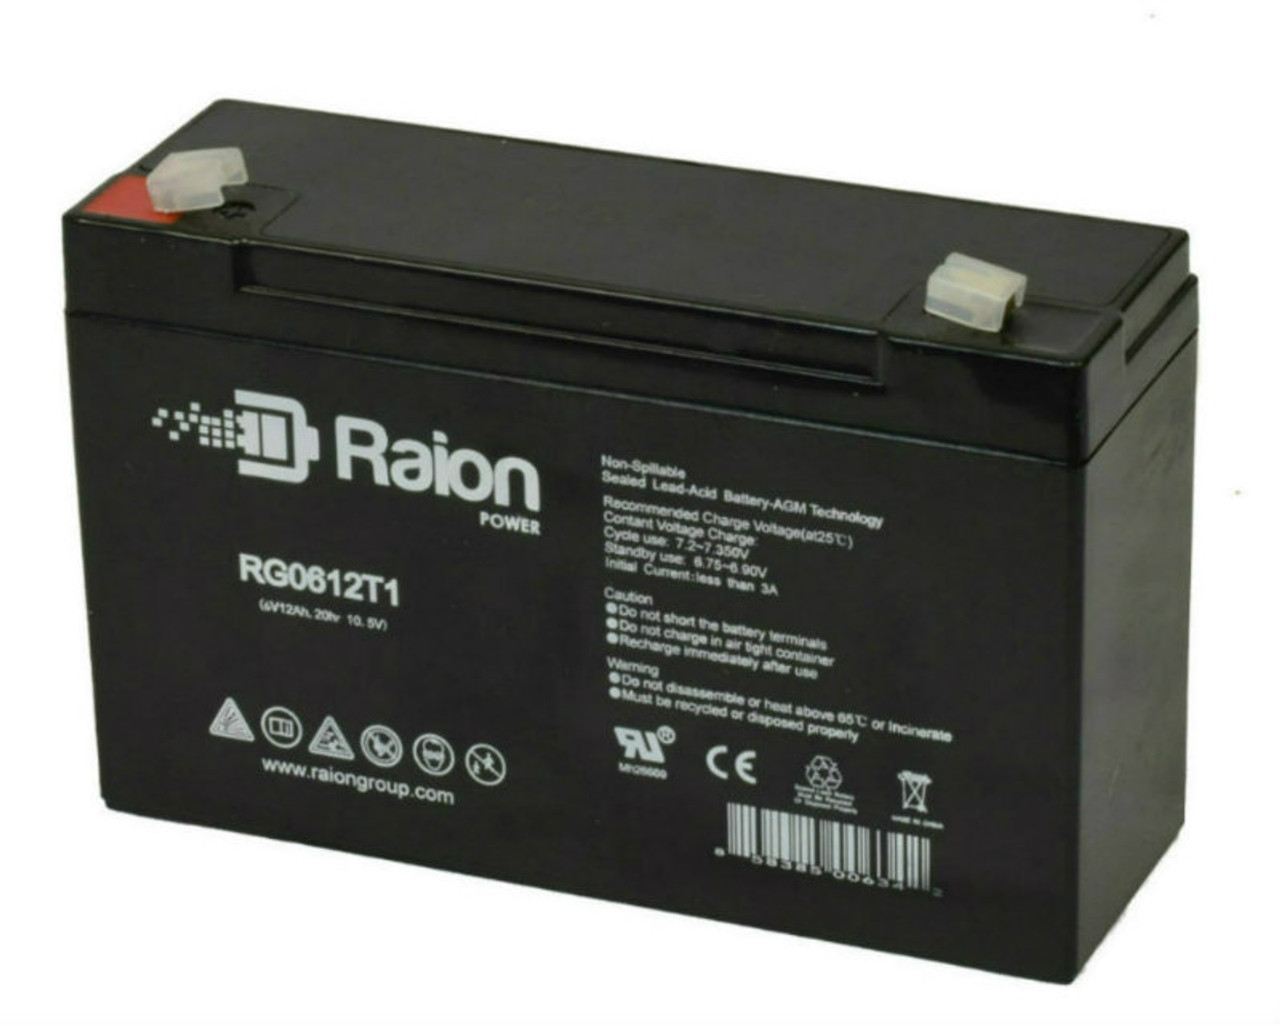 Raion Power RG06120T1 Replacement Emergency Light Battery for Holophane EH-10